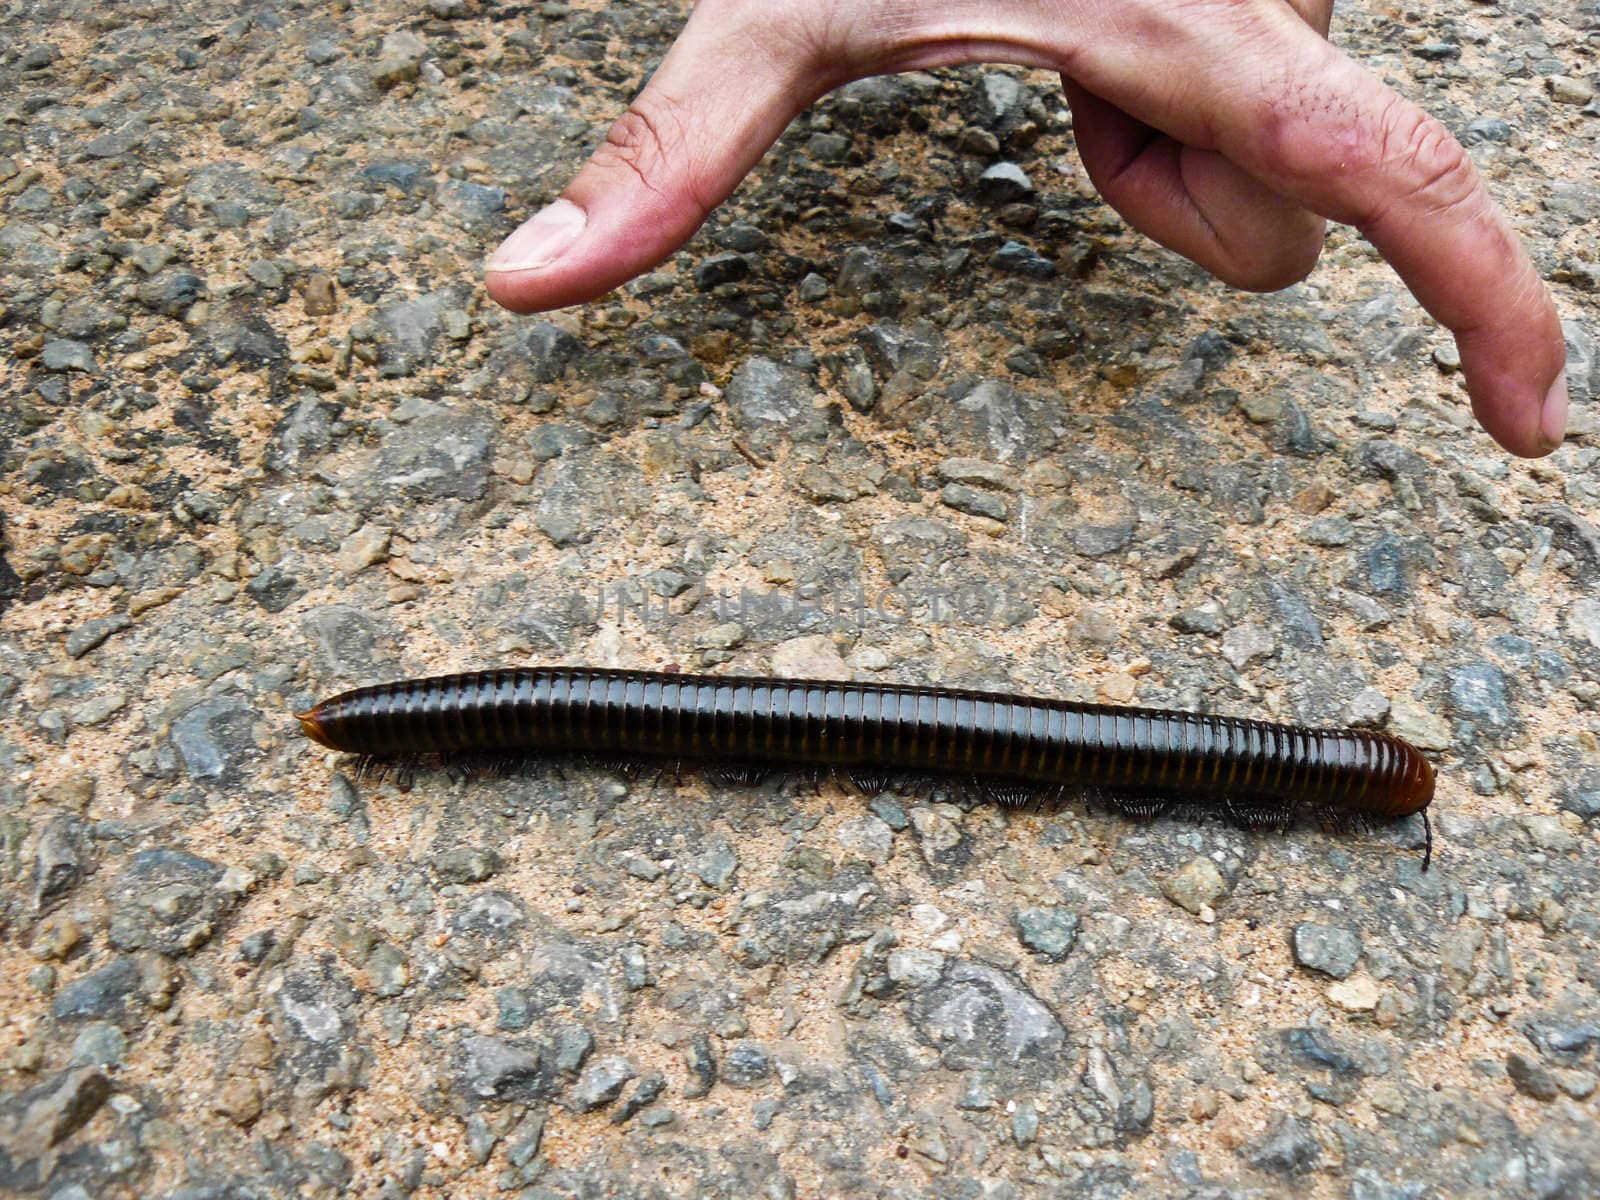 Giant Centipede on Phnom Bayangkao in Takeo province.
This was possibly over 15cm long.